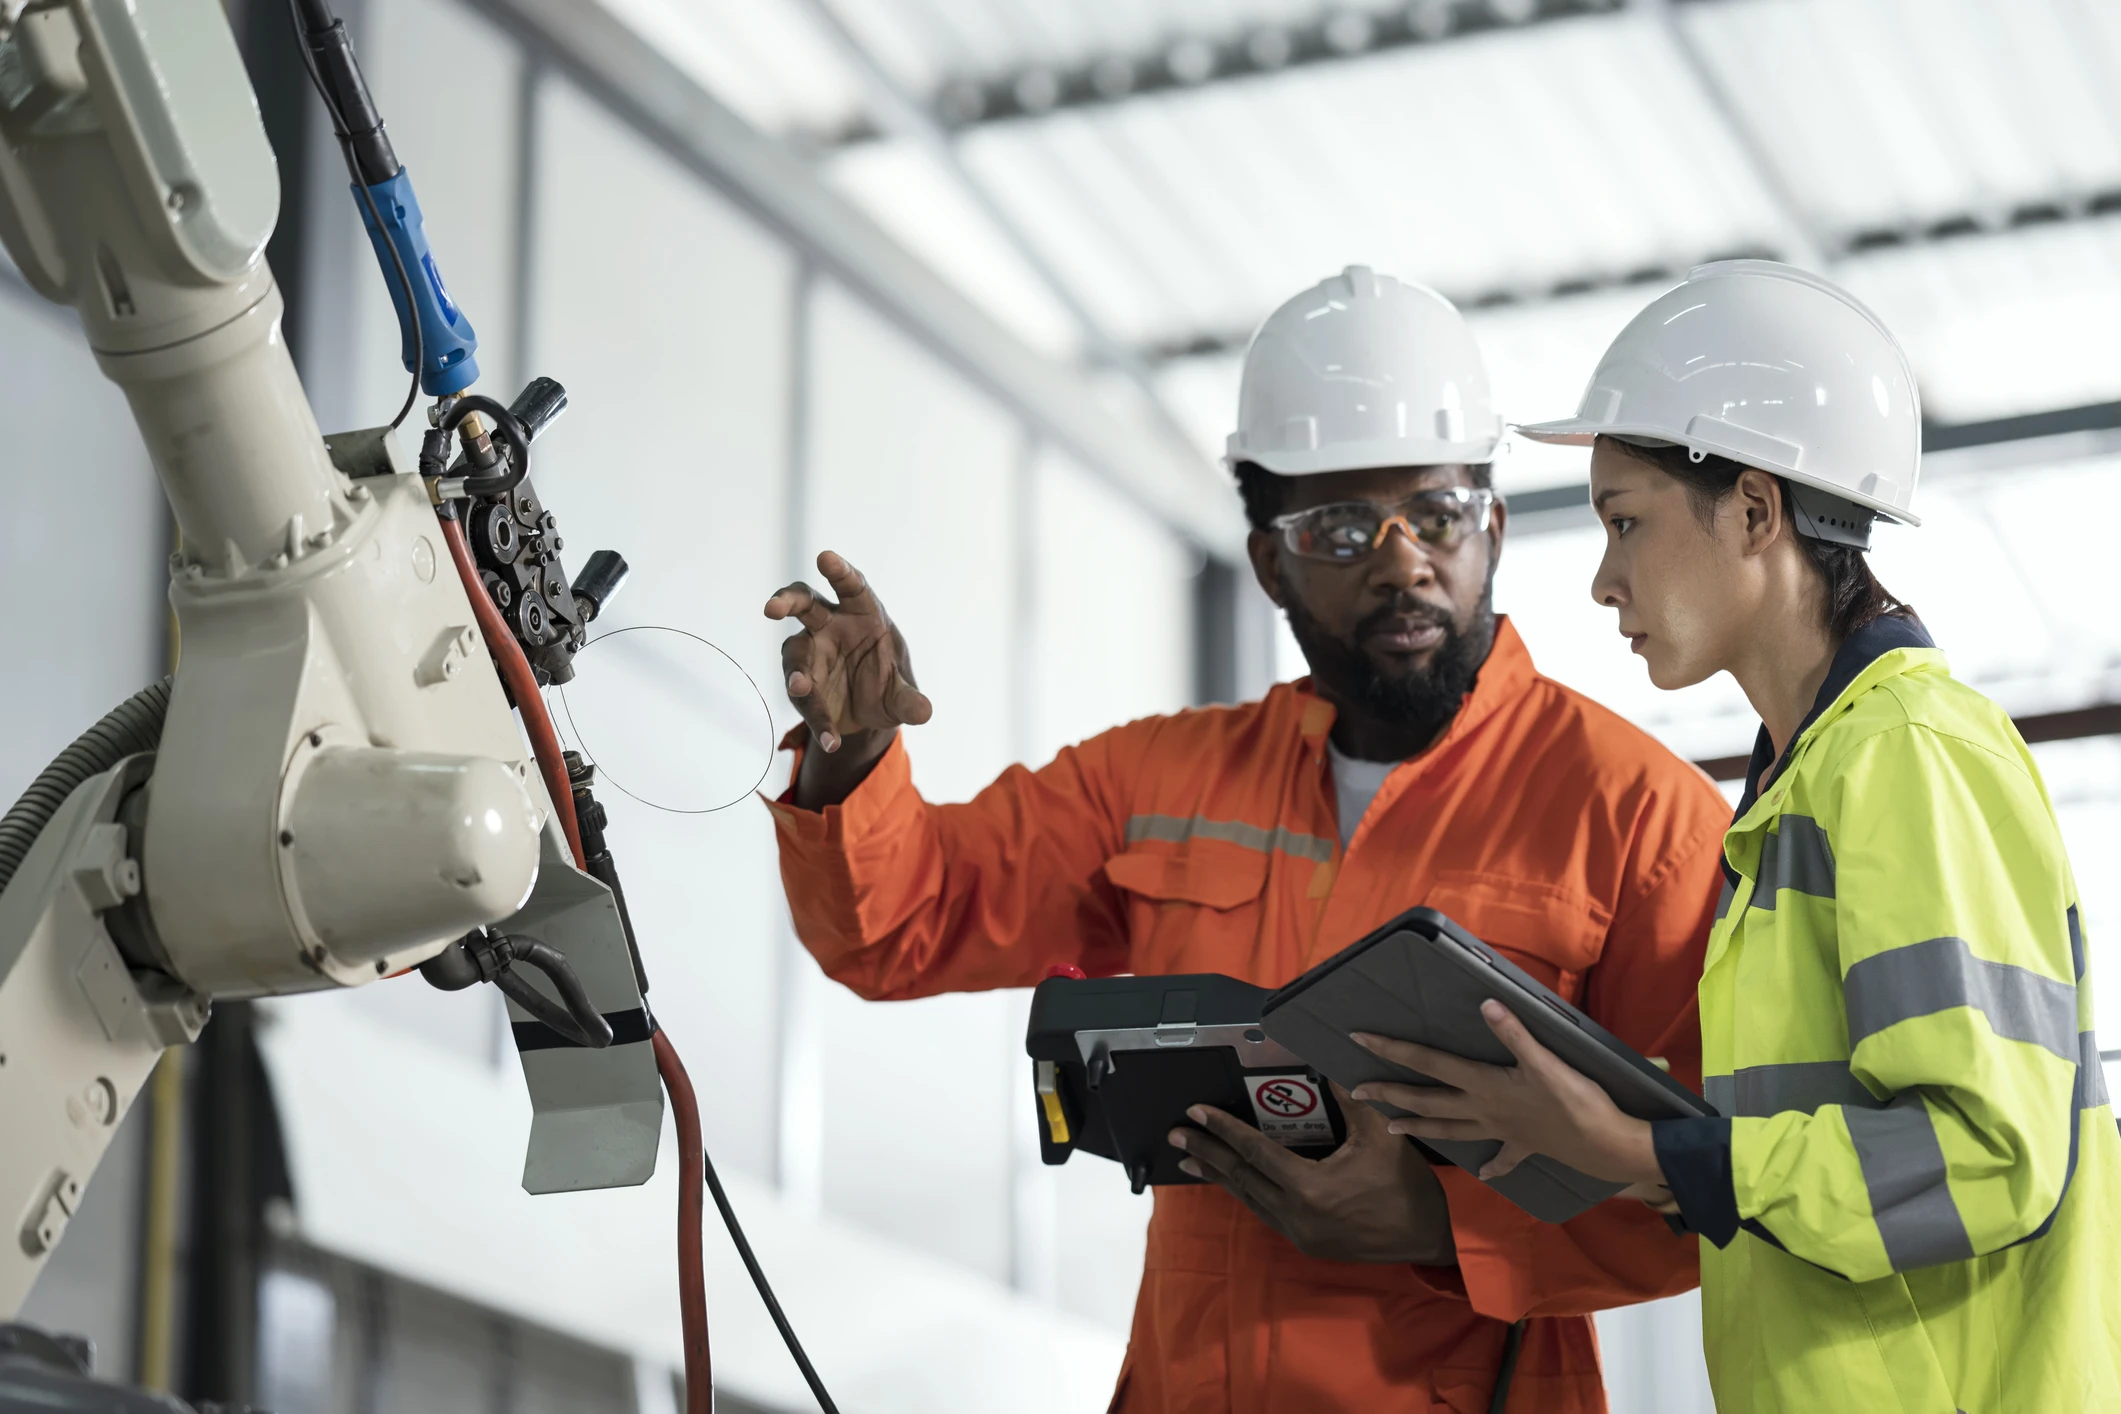 Two workers wearing hard hats examining a piece of machinery while holding IoT connected devices.